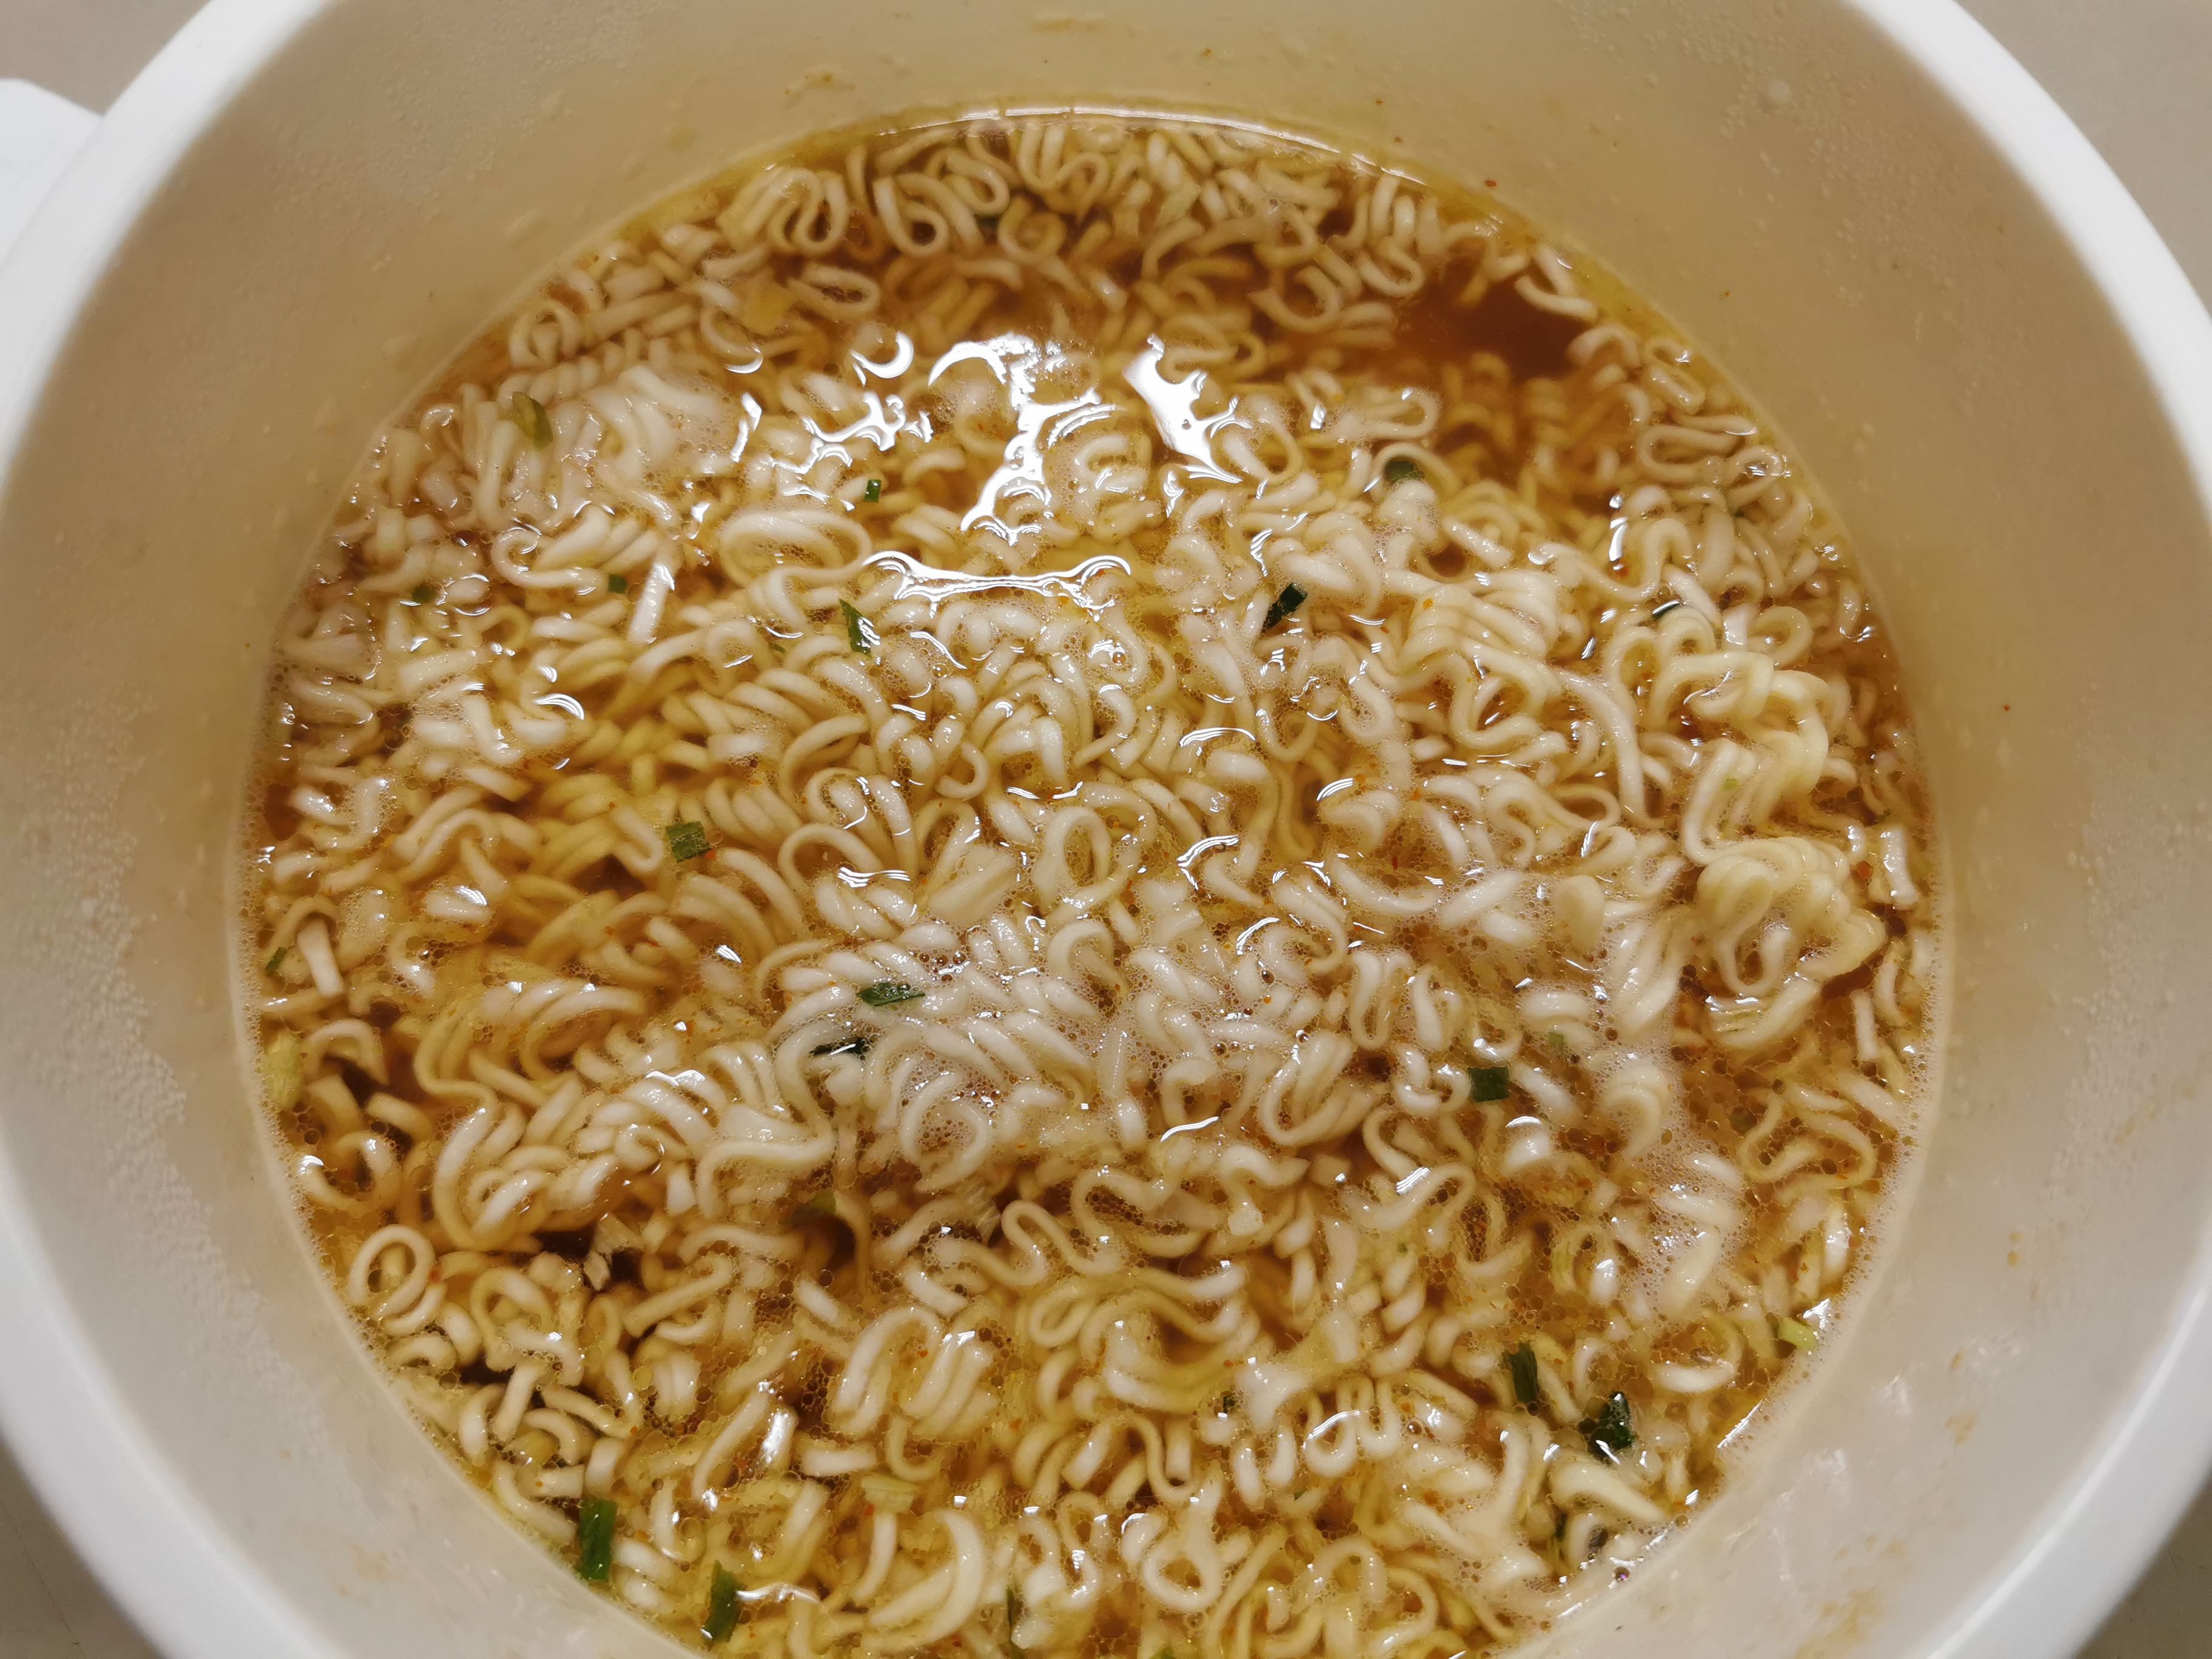 #2438: Mama "Oriental Style Instant Noodles Chicken Flavour" (2022)